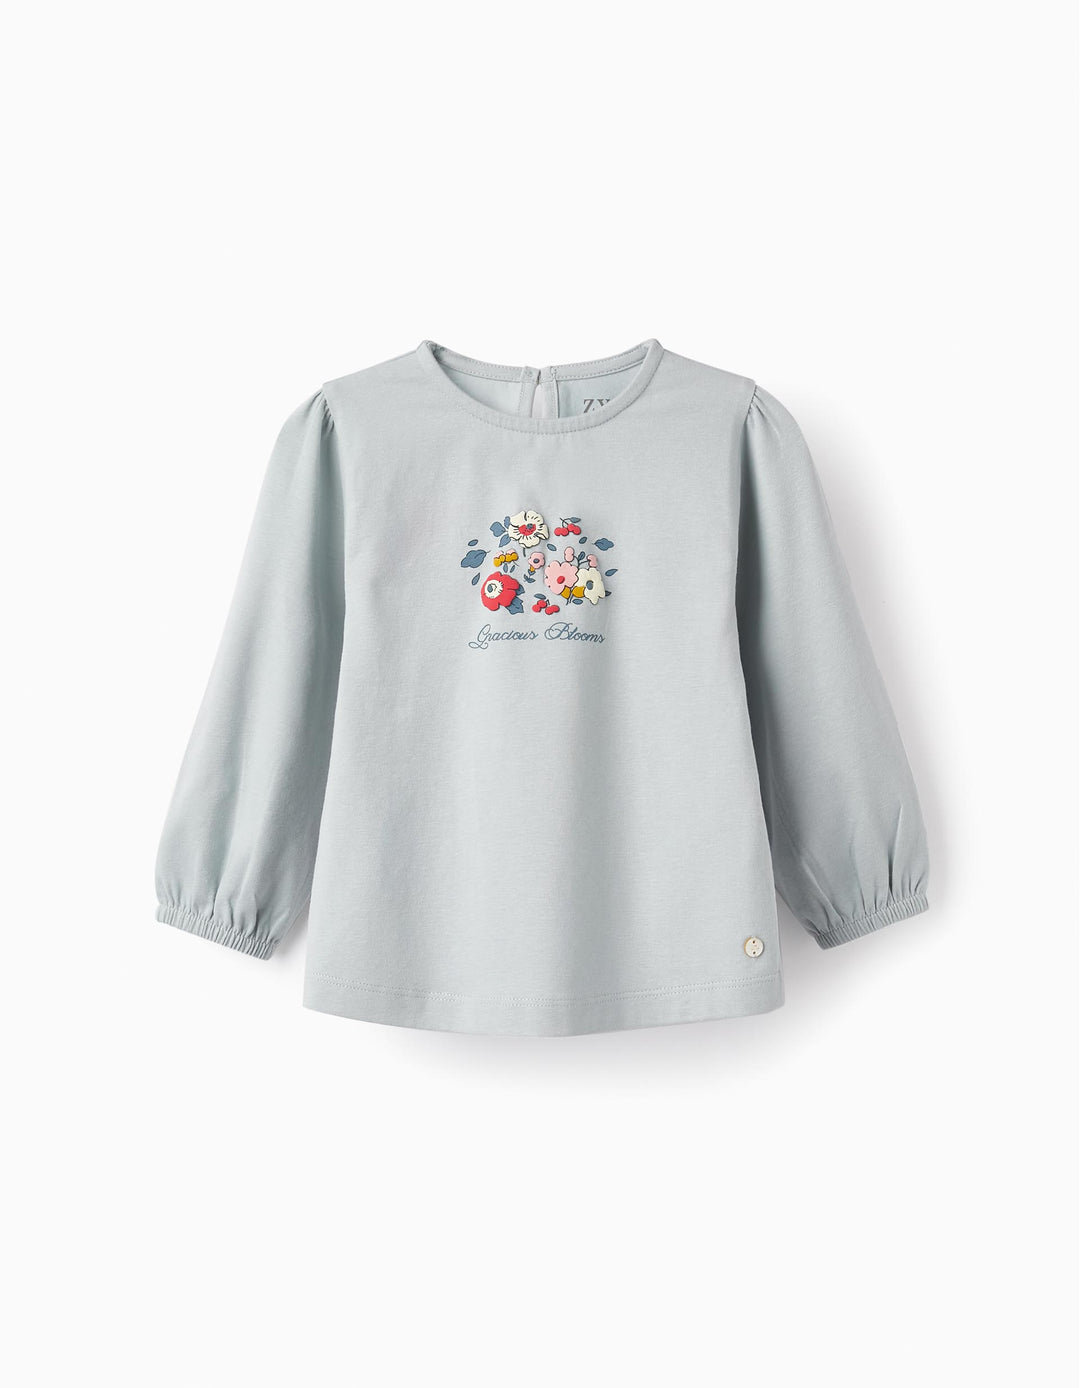 Long Sleeve Cotton T-shirt for Baby Girls 'Gracious Blooms', Light Blue